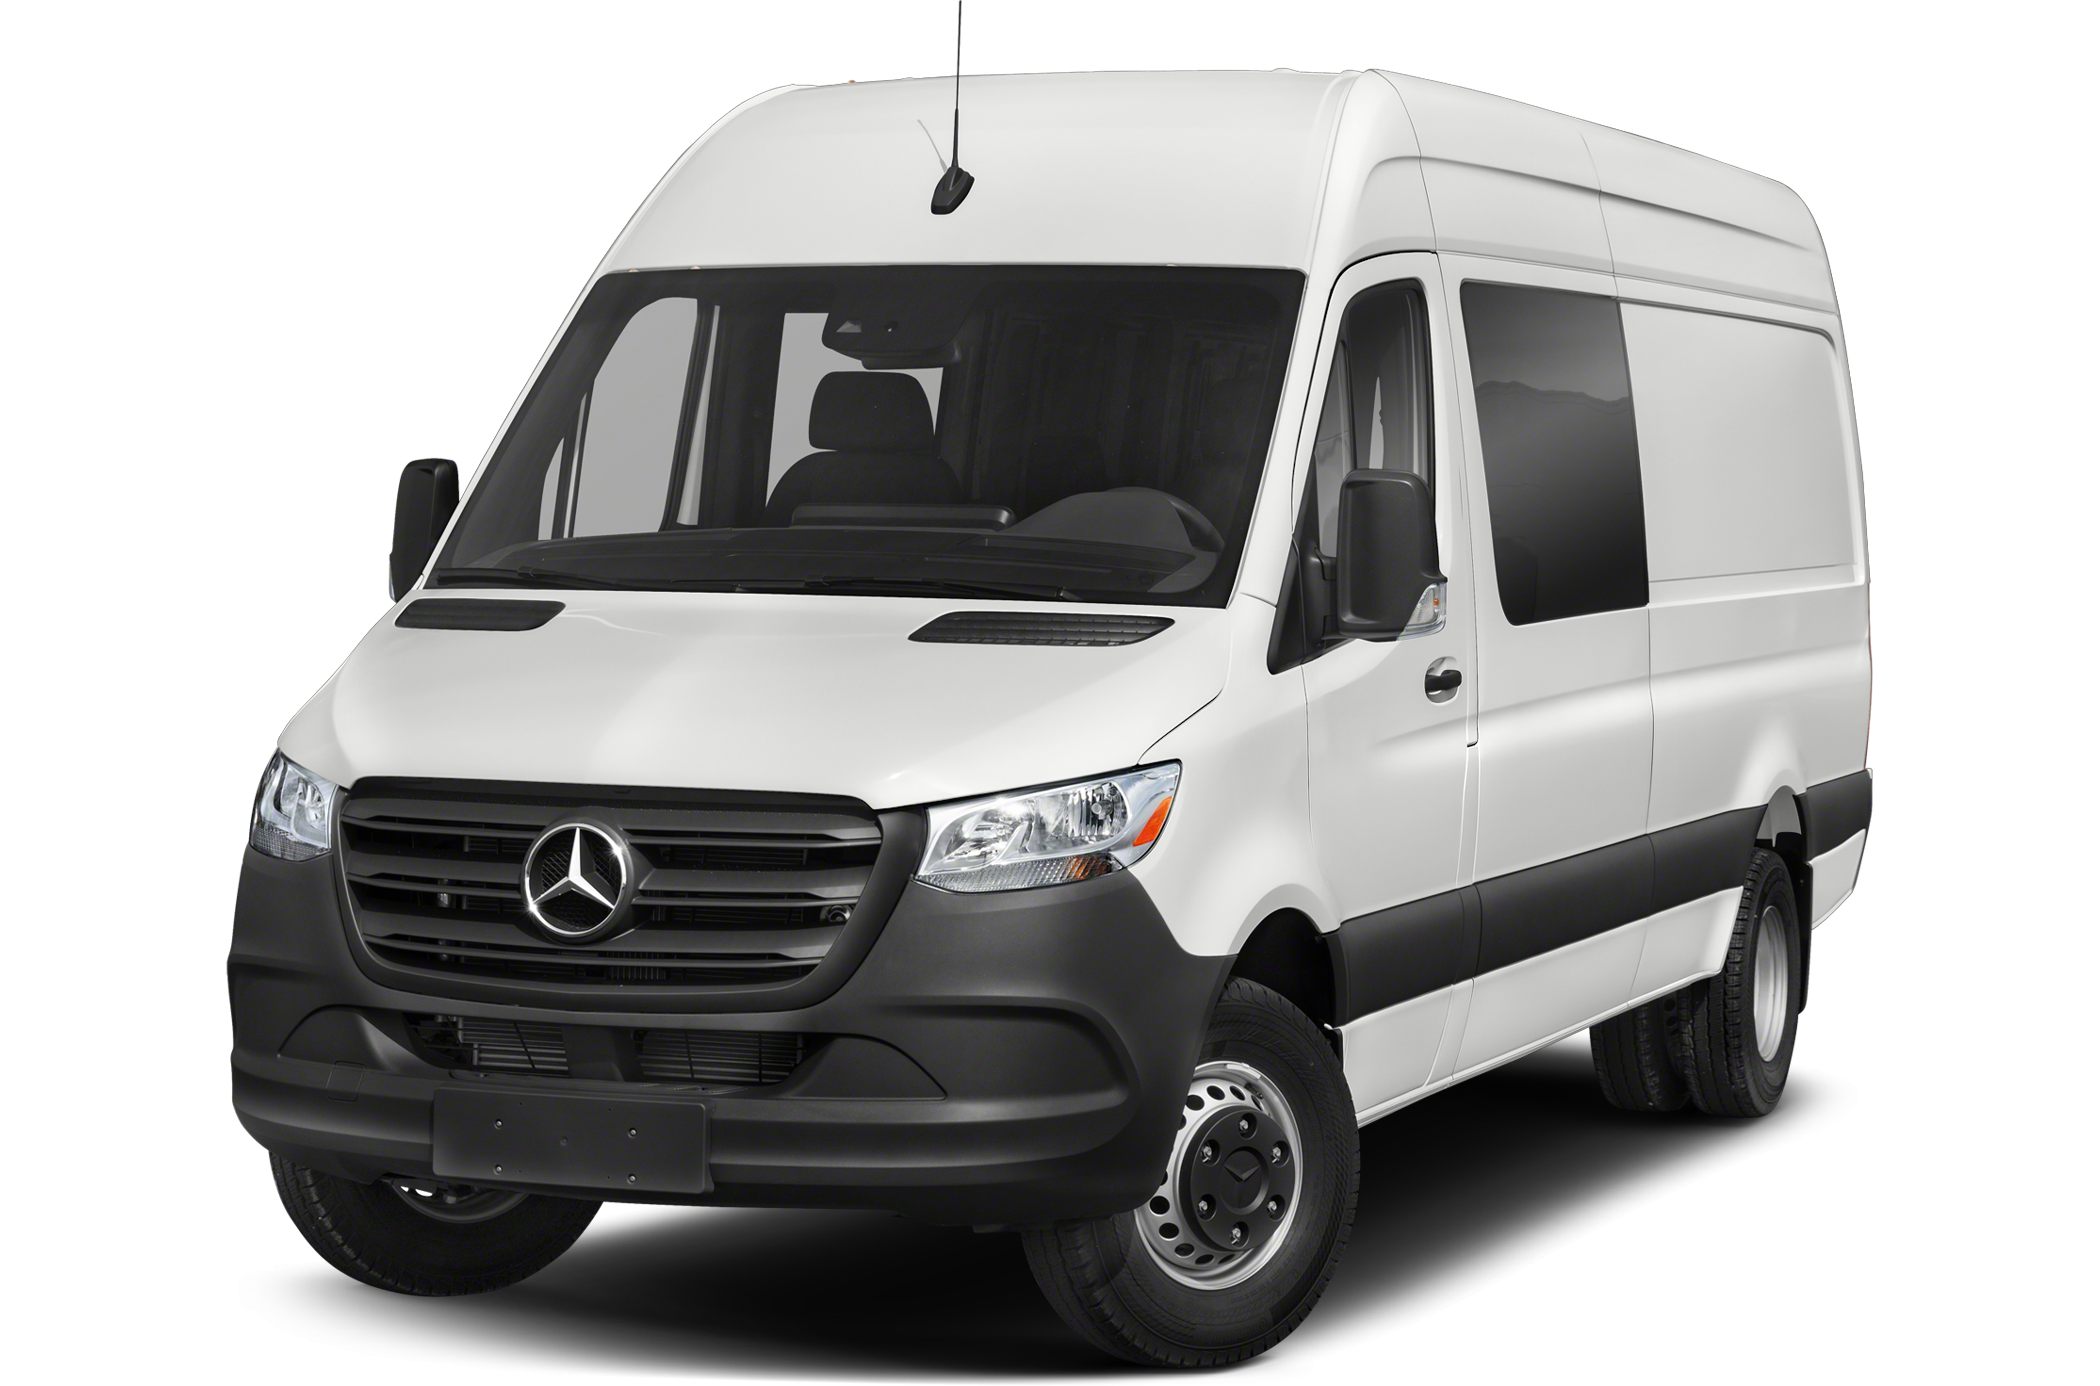 2019 Mercedes Benz Sprinter 3500 High Roof V6 Sprinter 3500 Crew Van 144 In Wb Pricing And Options